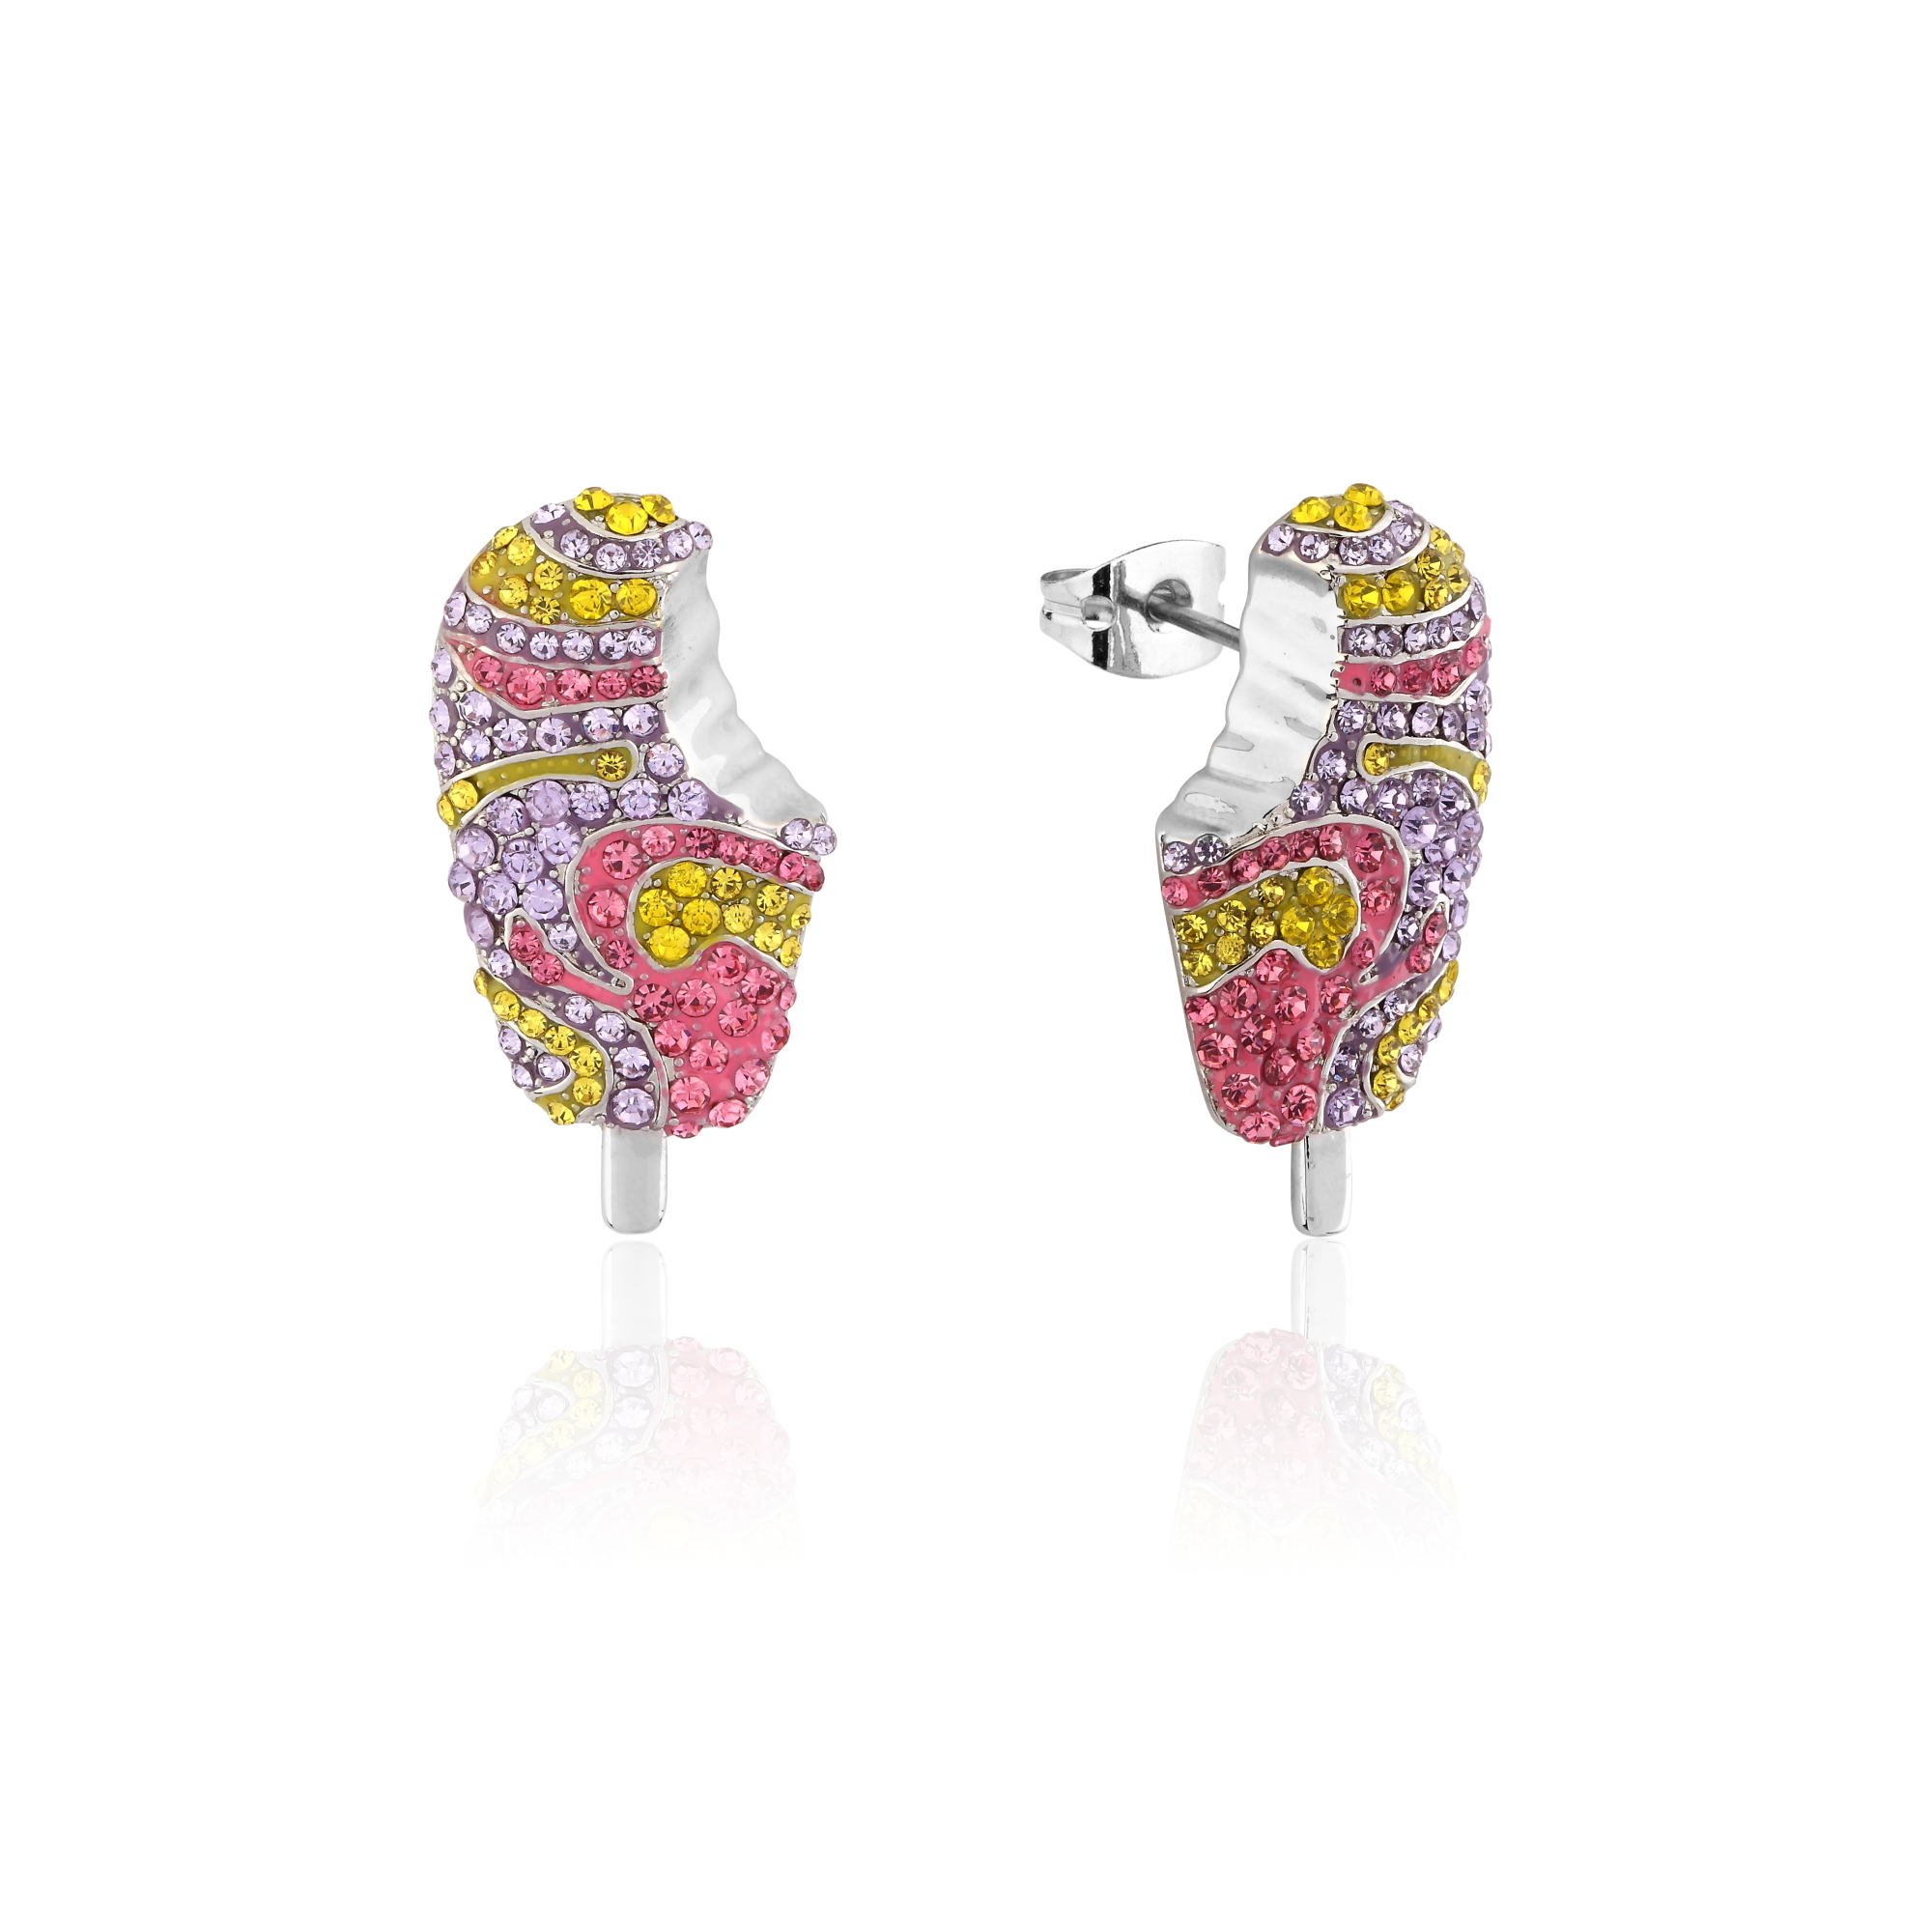 Streets Paddle Pop White Gold Plated Stainless Steel Rainbow Crystal Stud Earrings